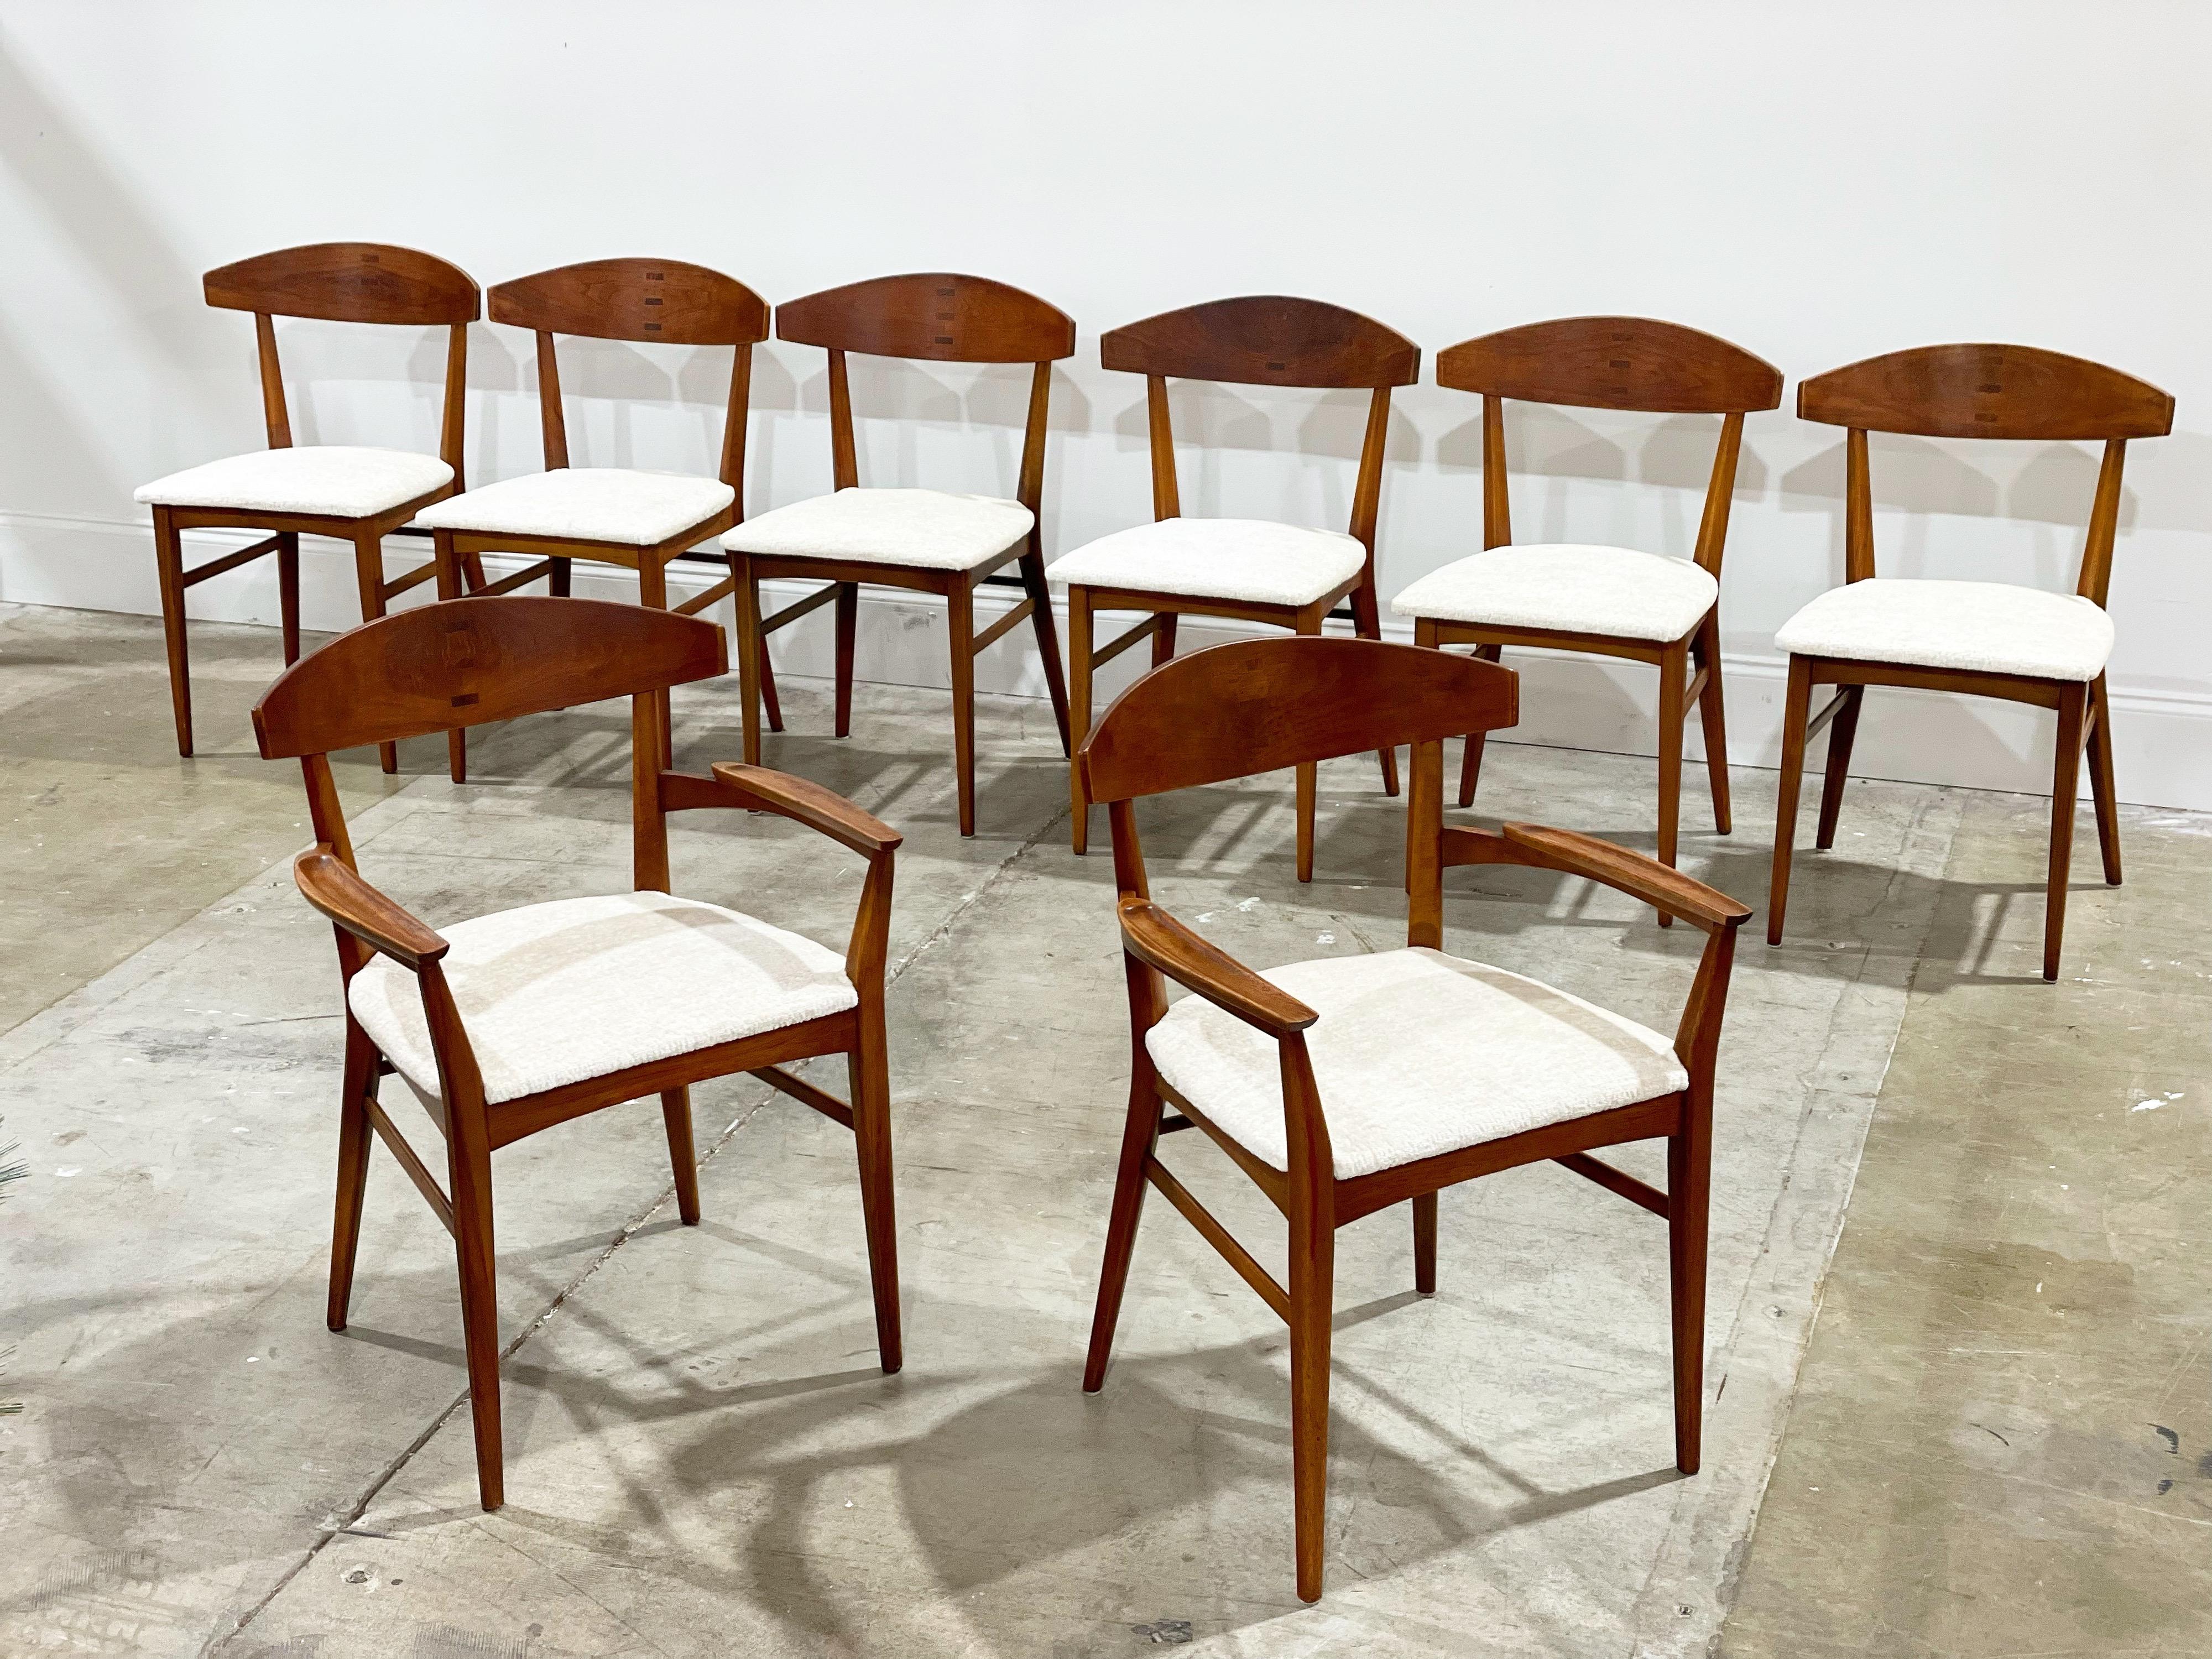 Set of 8 scarce walnut and rosewood dining chairs by Paul McCobb for his 